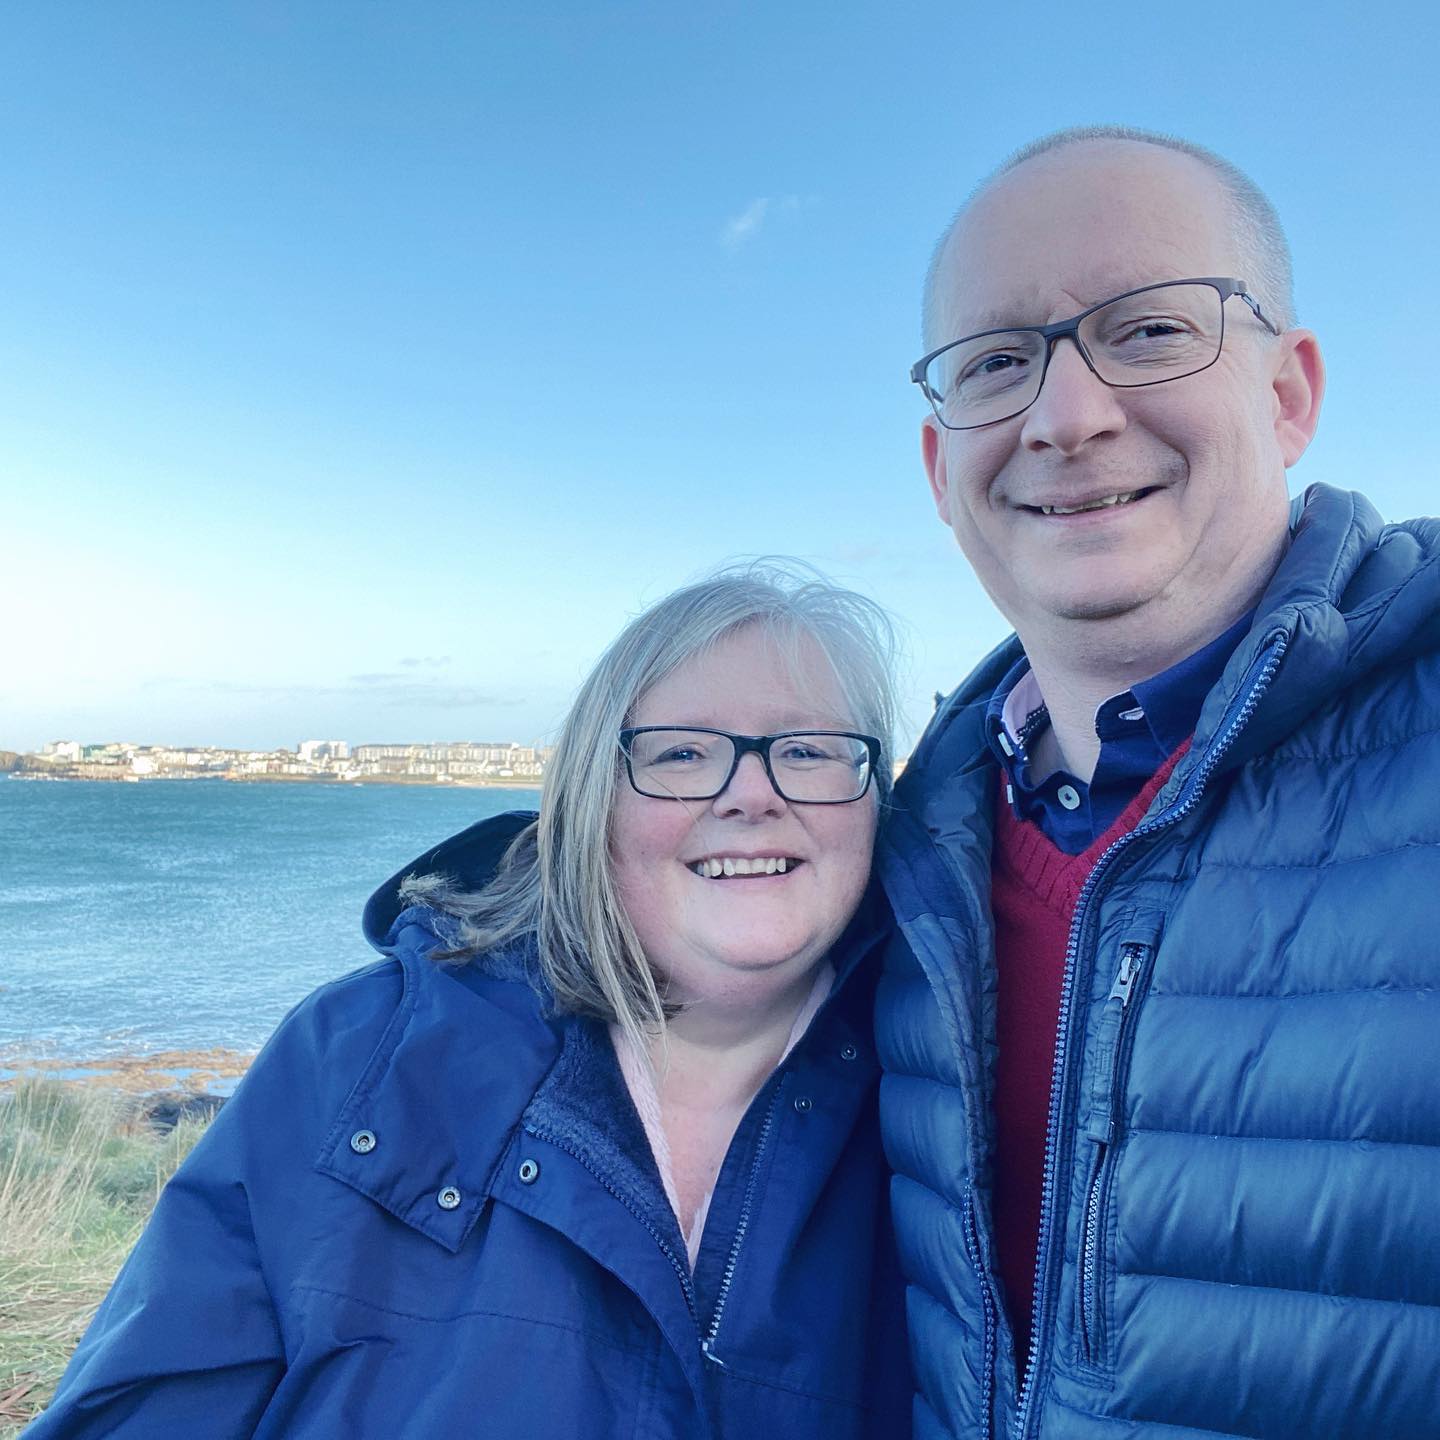 Welcoming in the New Year with a blustery walk by the sea in Portrush. Wishing you the best for 2022 x